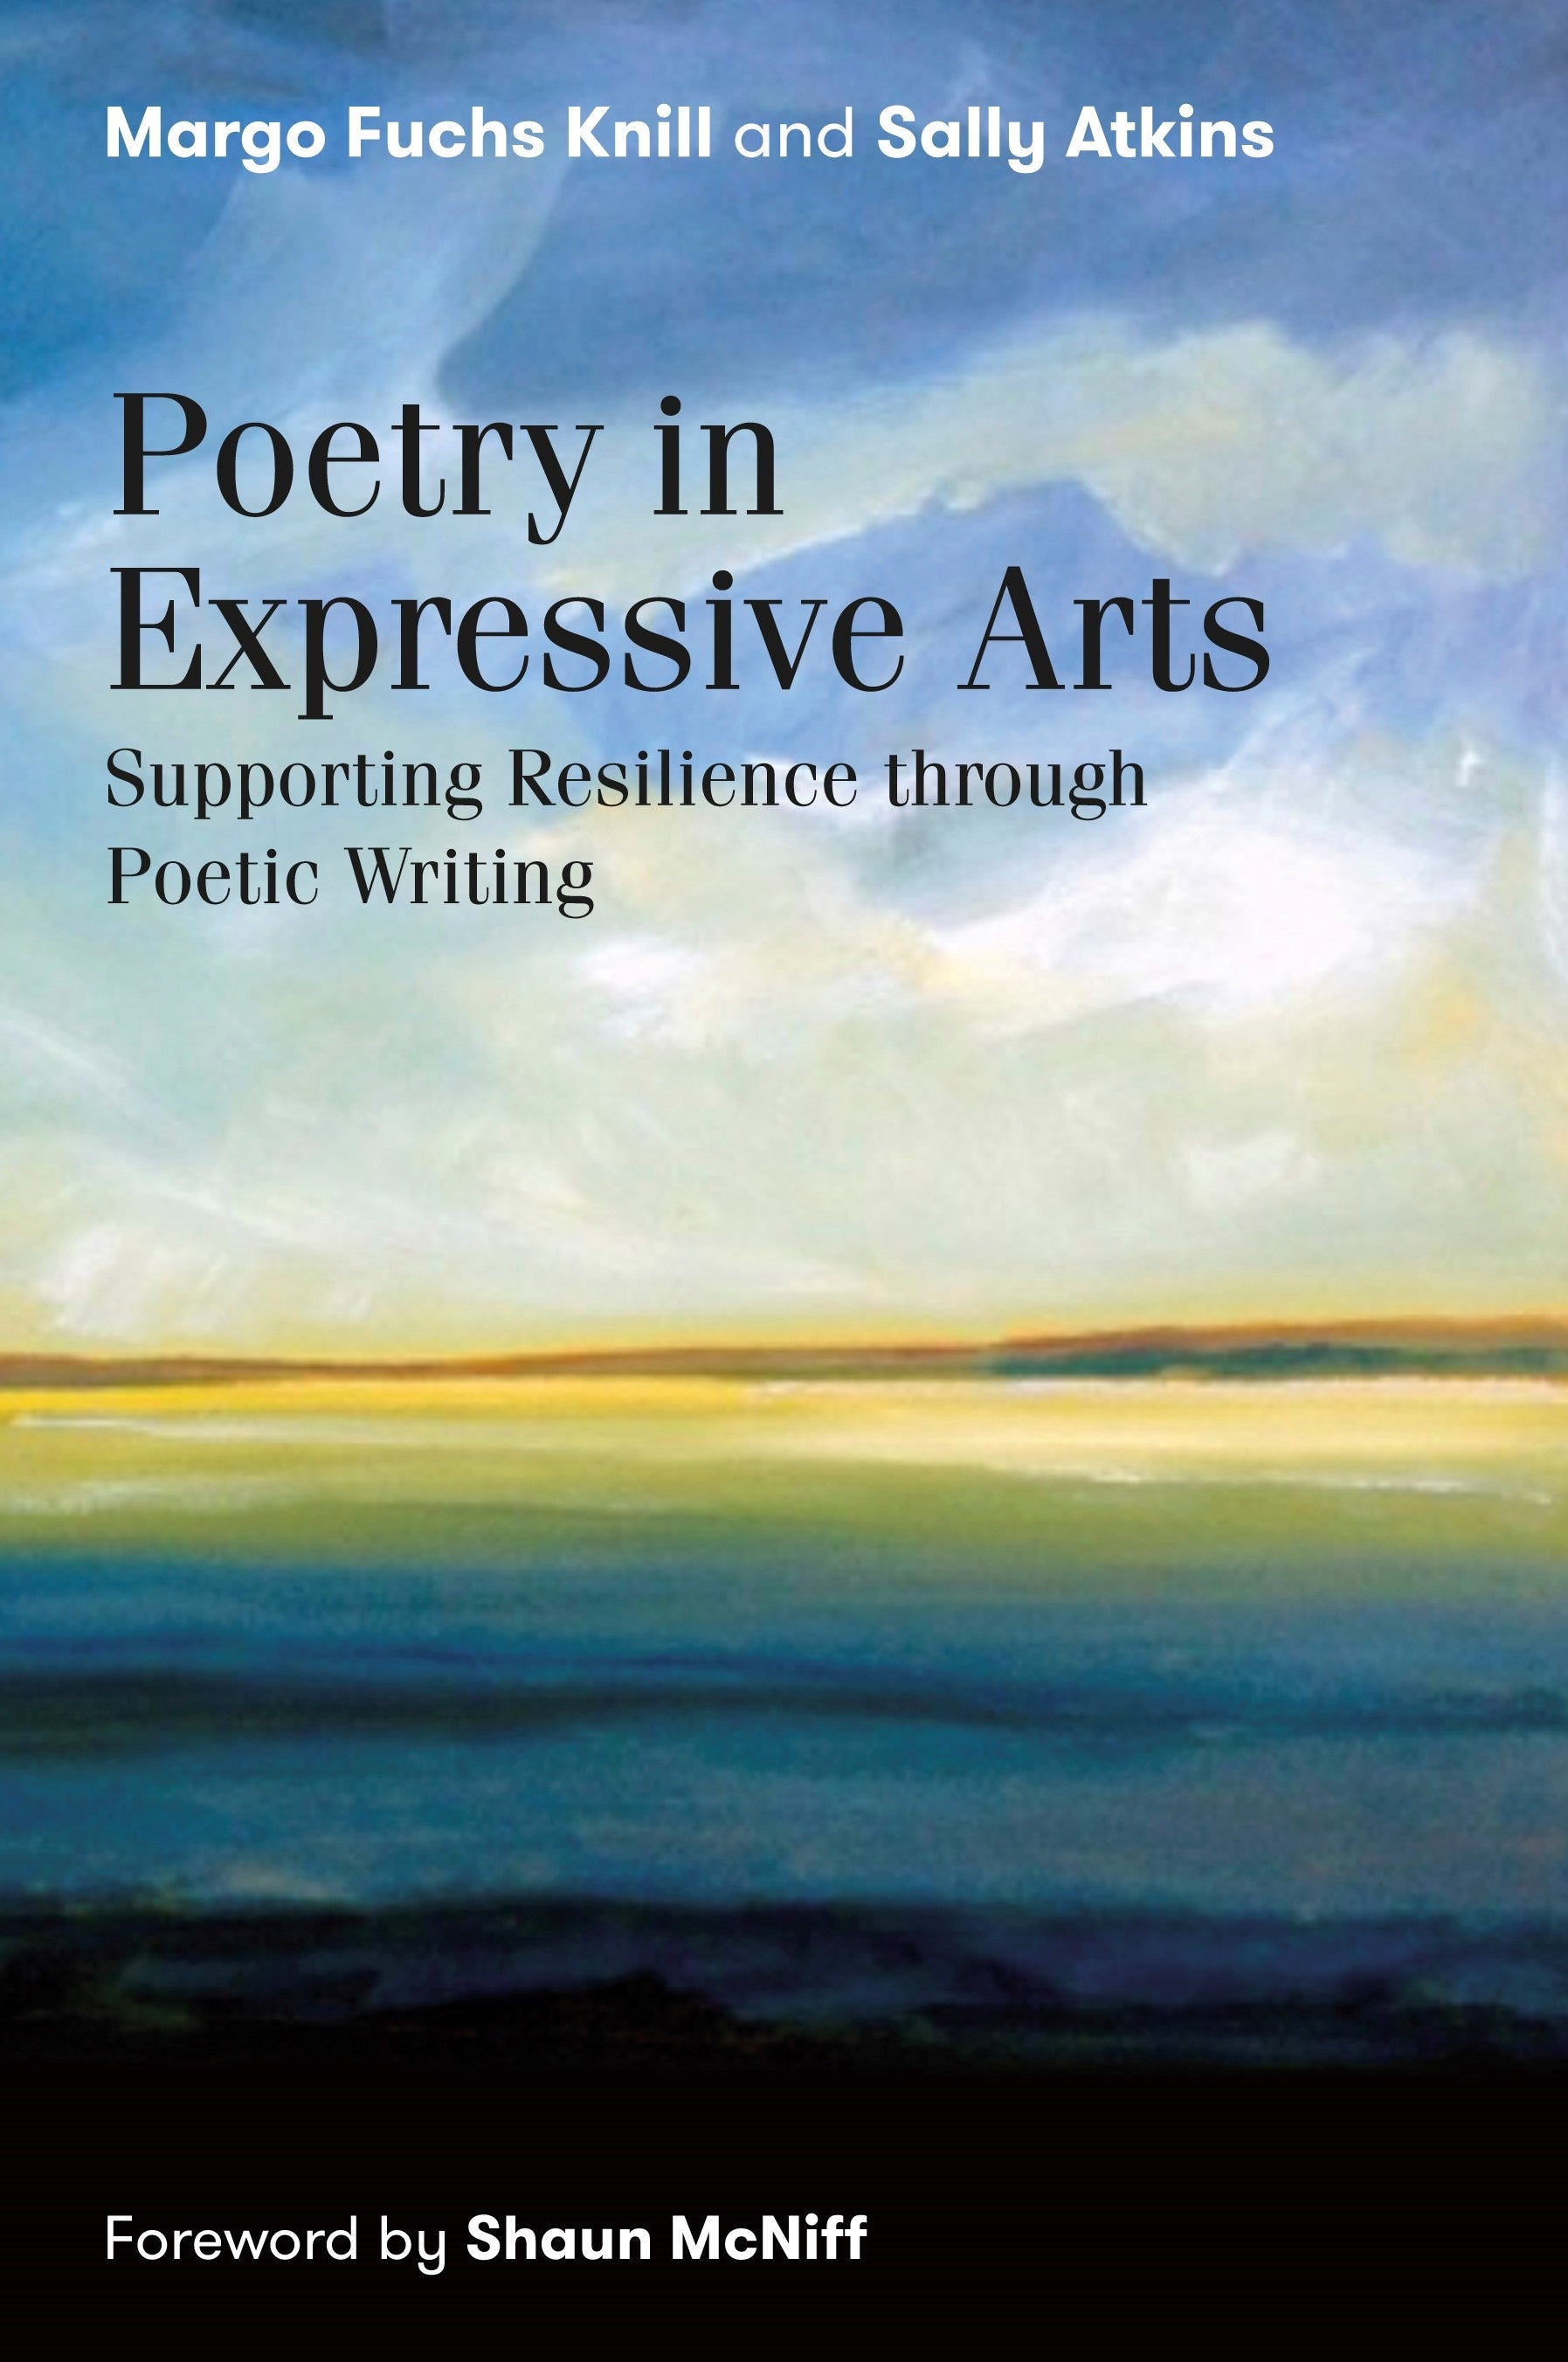 Poetry in Expressive Arts by Margo Fuchs Knill, Sally Atkins, Shaun McNiff